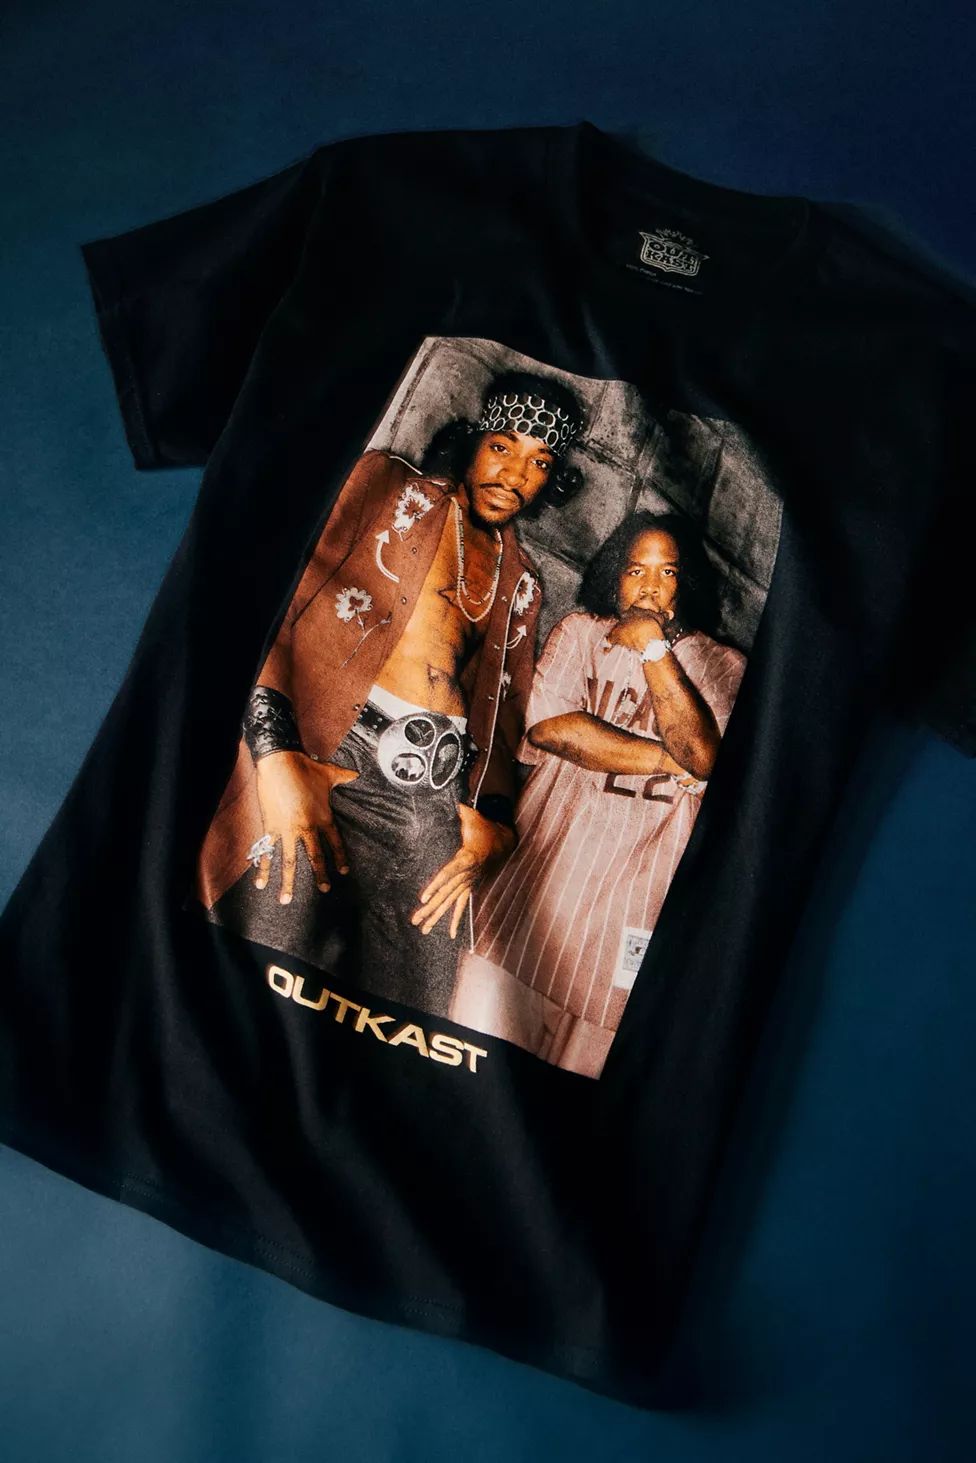 Outkast Photo Tee | Urban Outfitters (US and RoW)